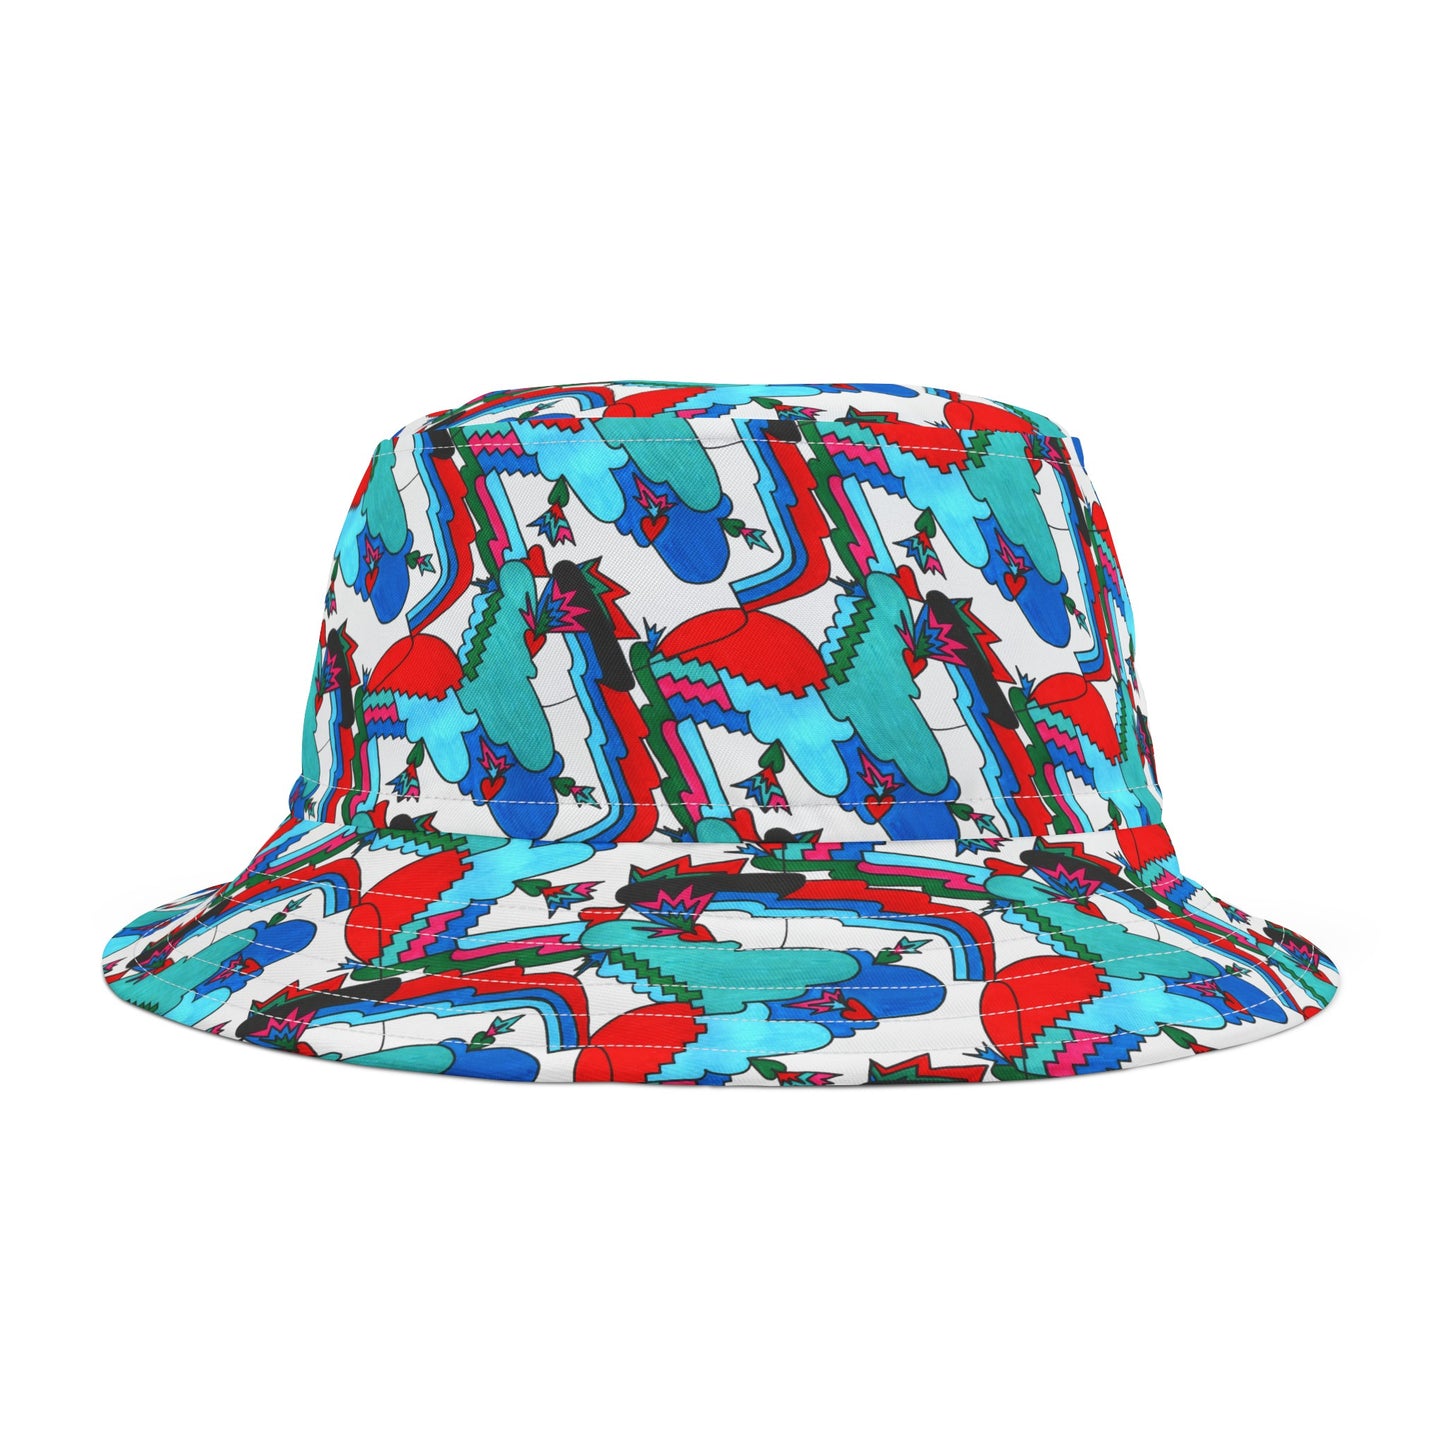 Abstract Hand Drawn Bucket Hat, All Over Print Maximalist Design, Colorful Geometric Ink Drawing Sun Hat, Pop Art Deco Modern All-Over Print